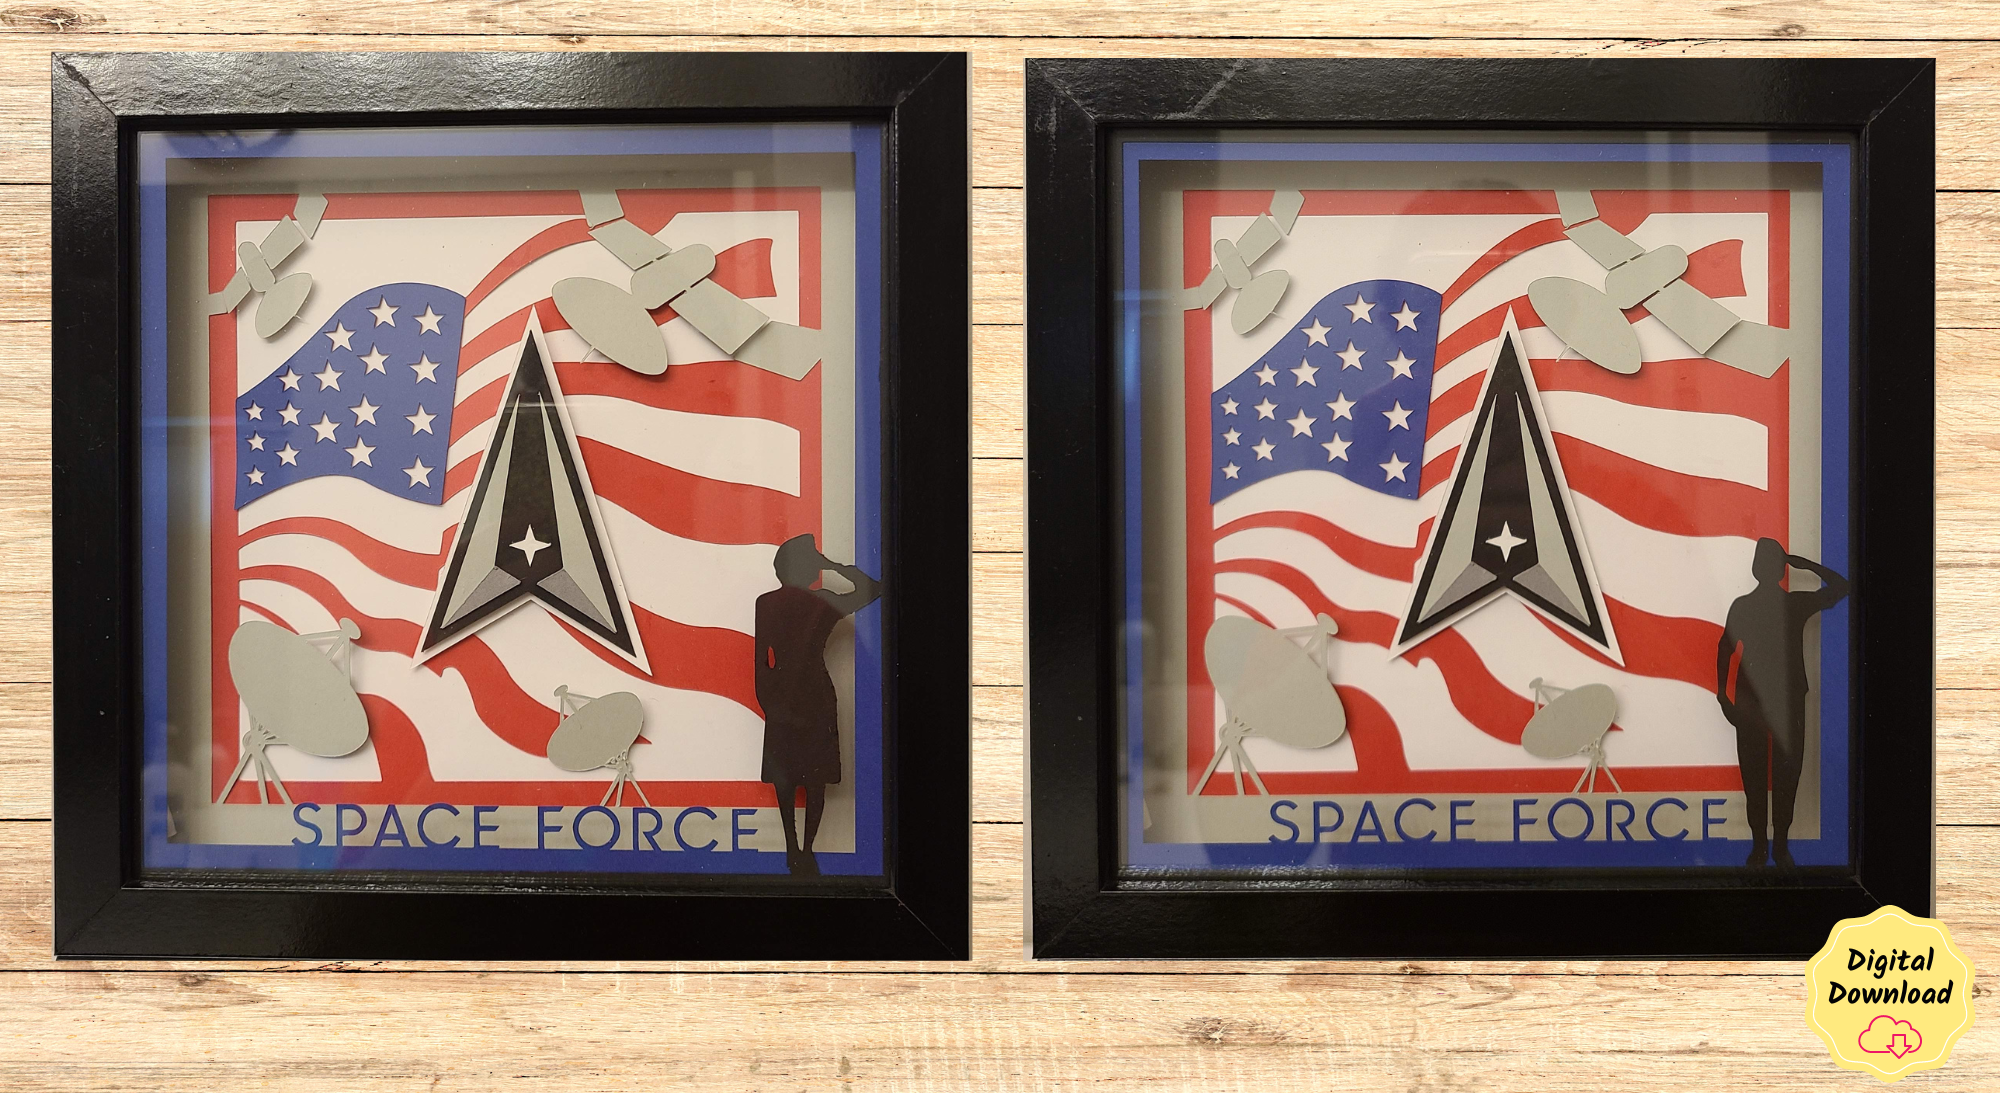 How To Make A Layered Space Force Shadow Box For A Female Guardian (Tutorial Video!)